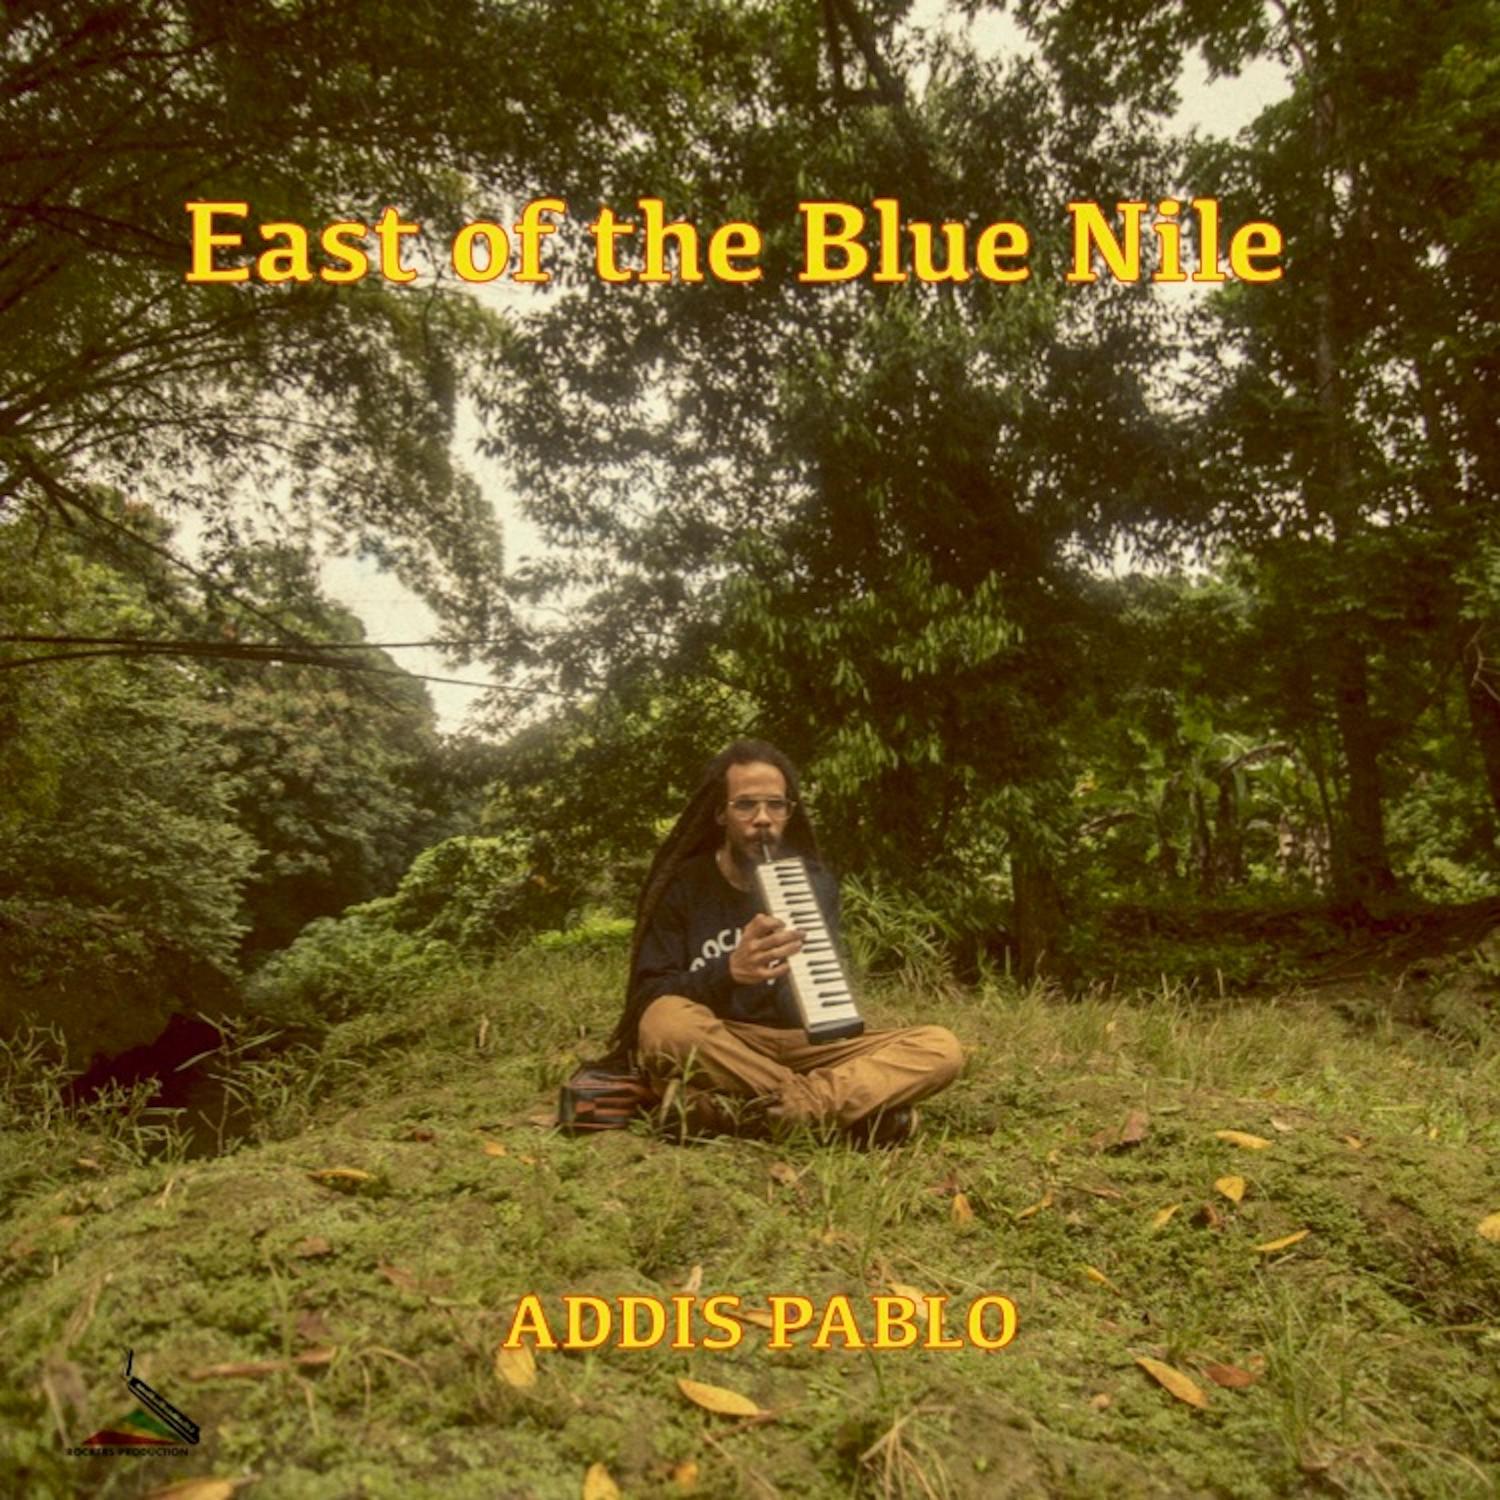 West of the Blue Nile